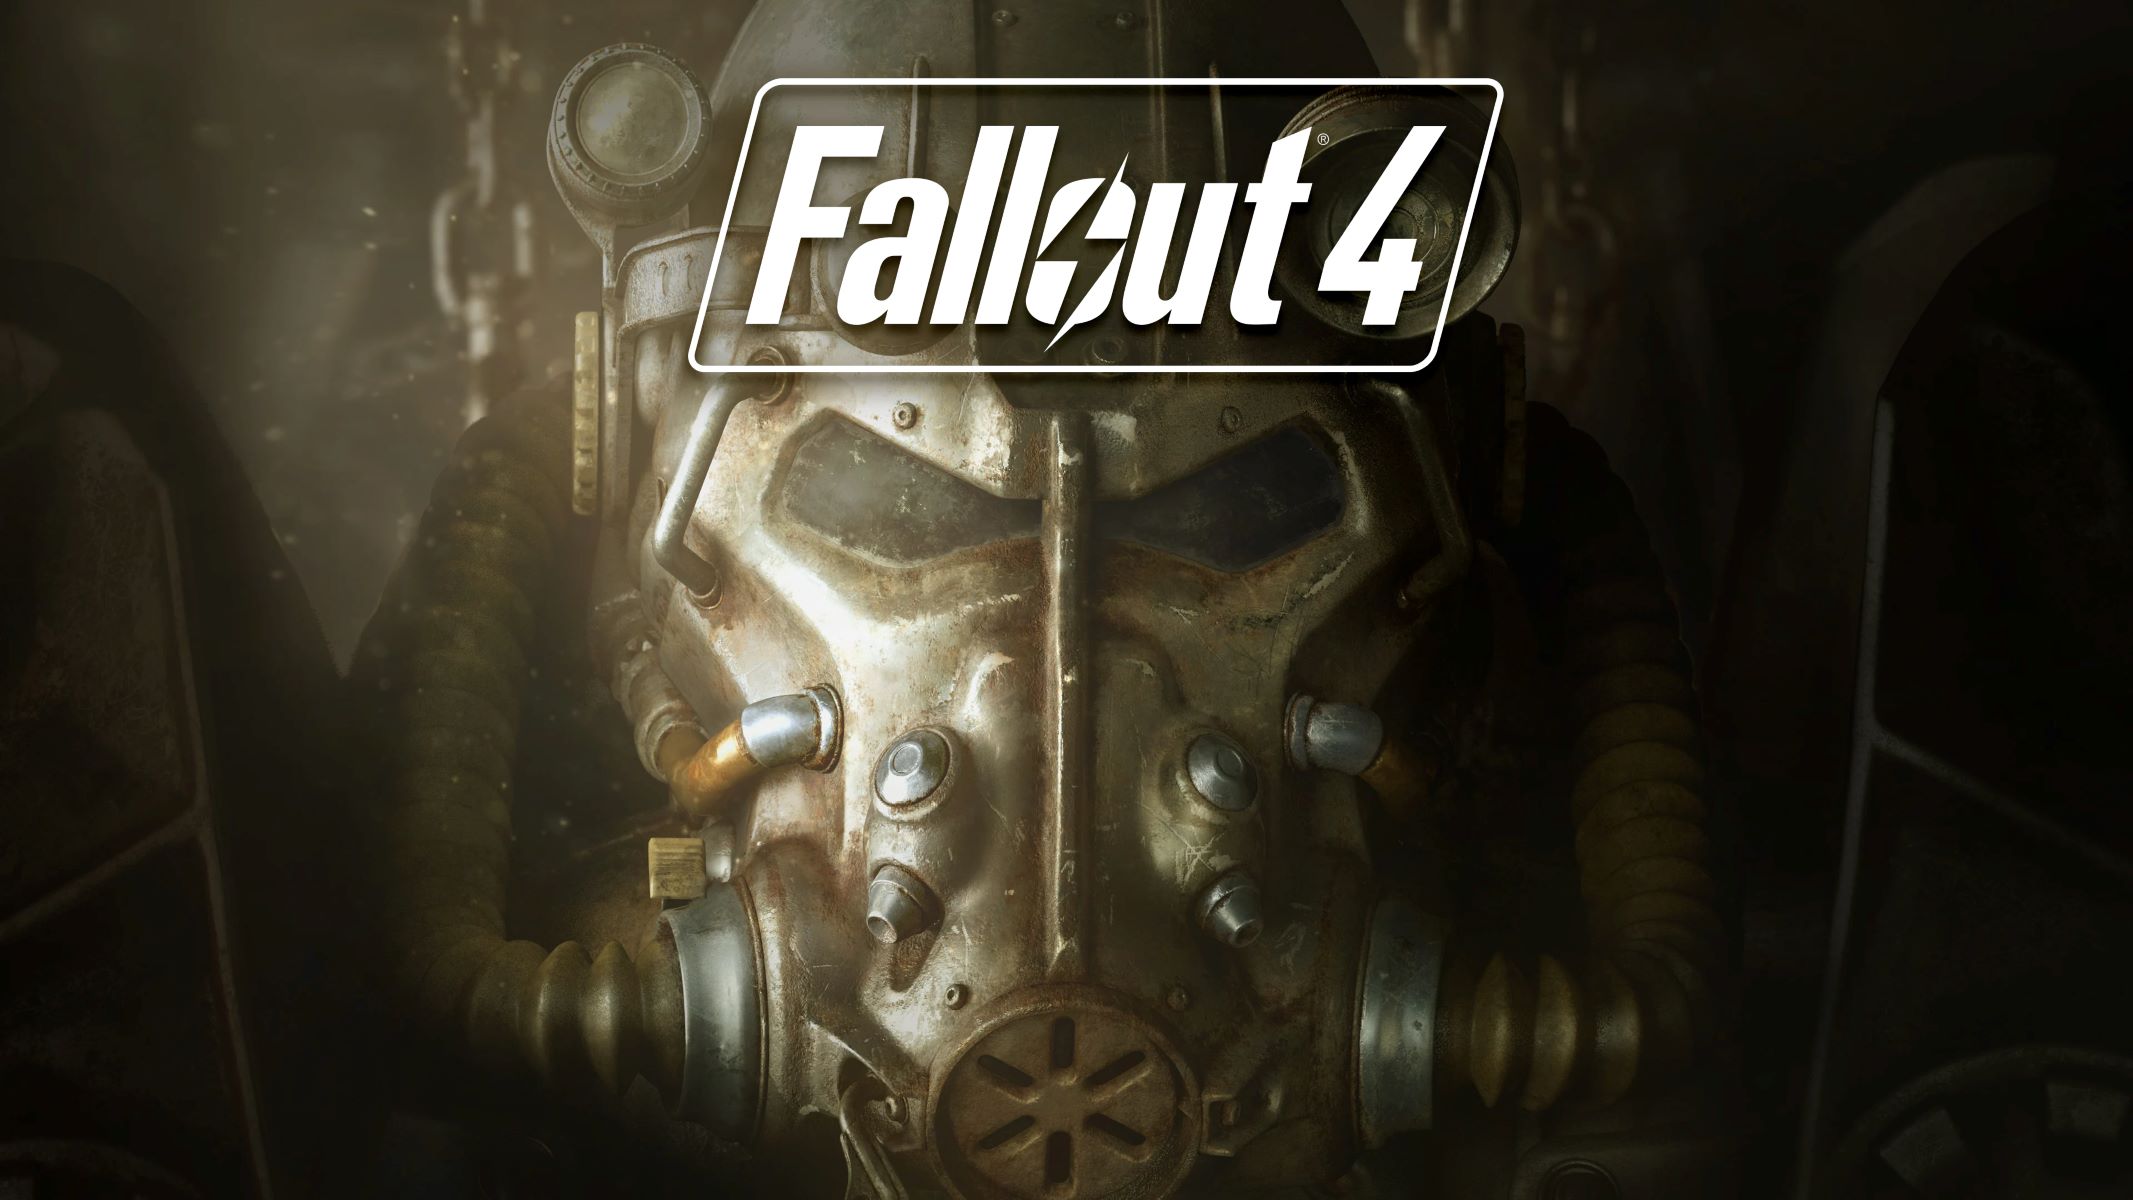 How To Set Up A Game Controller For PC For Fallout 4